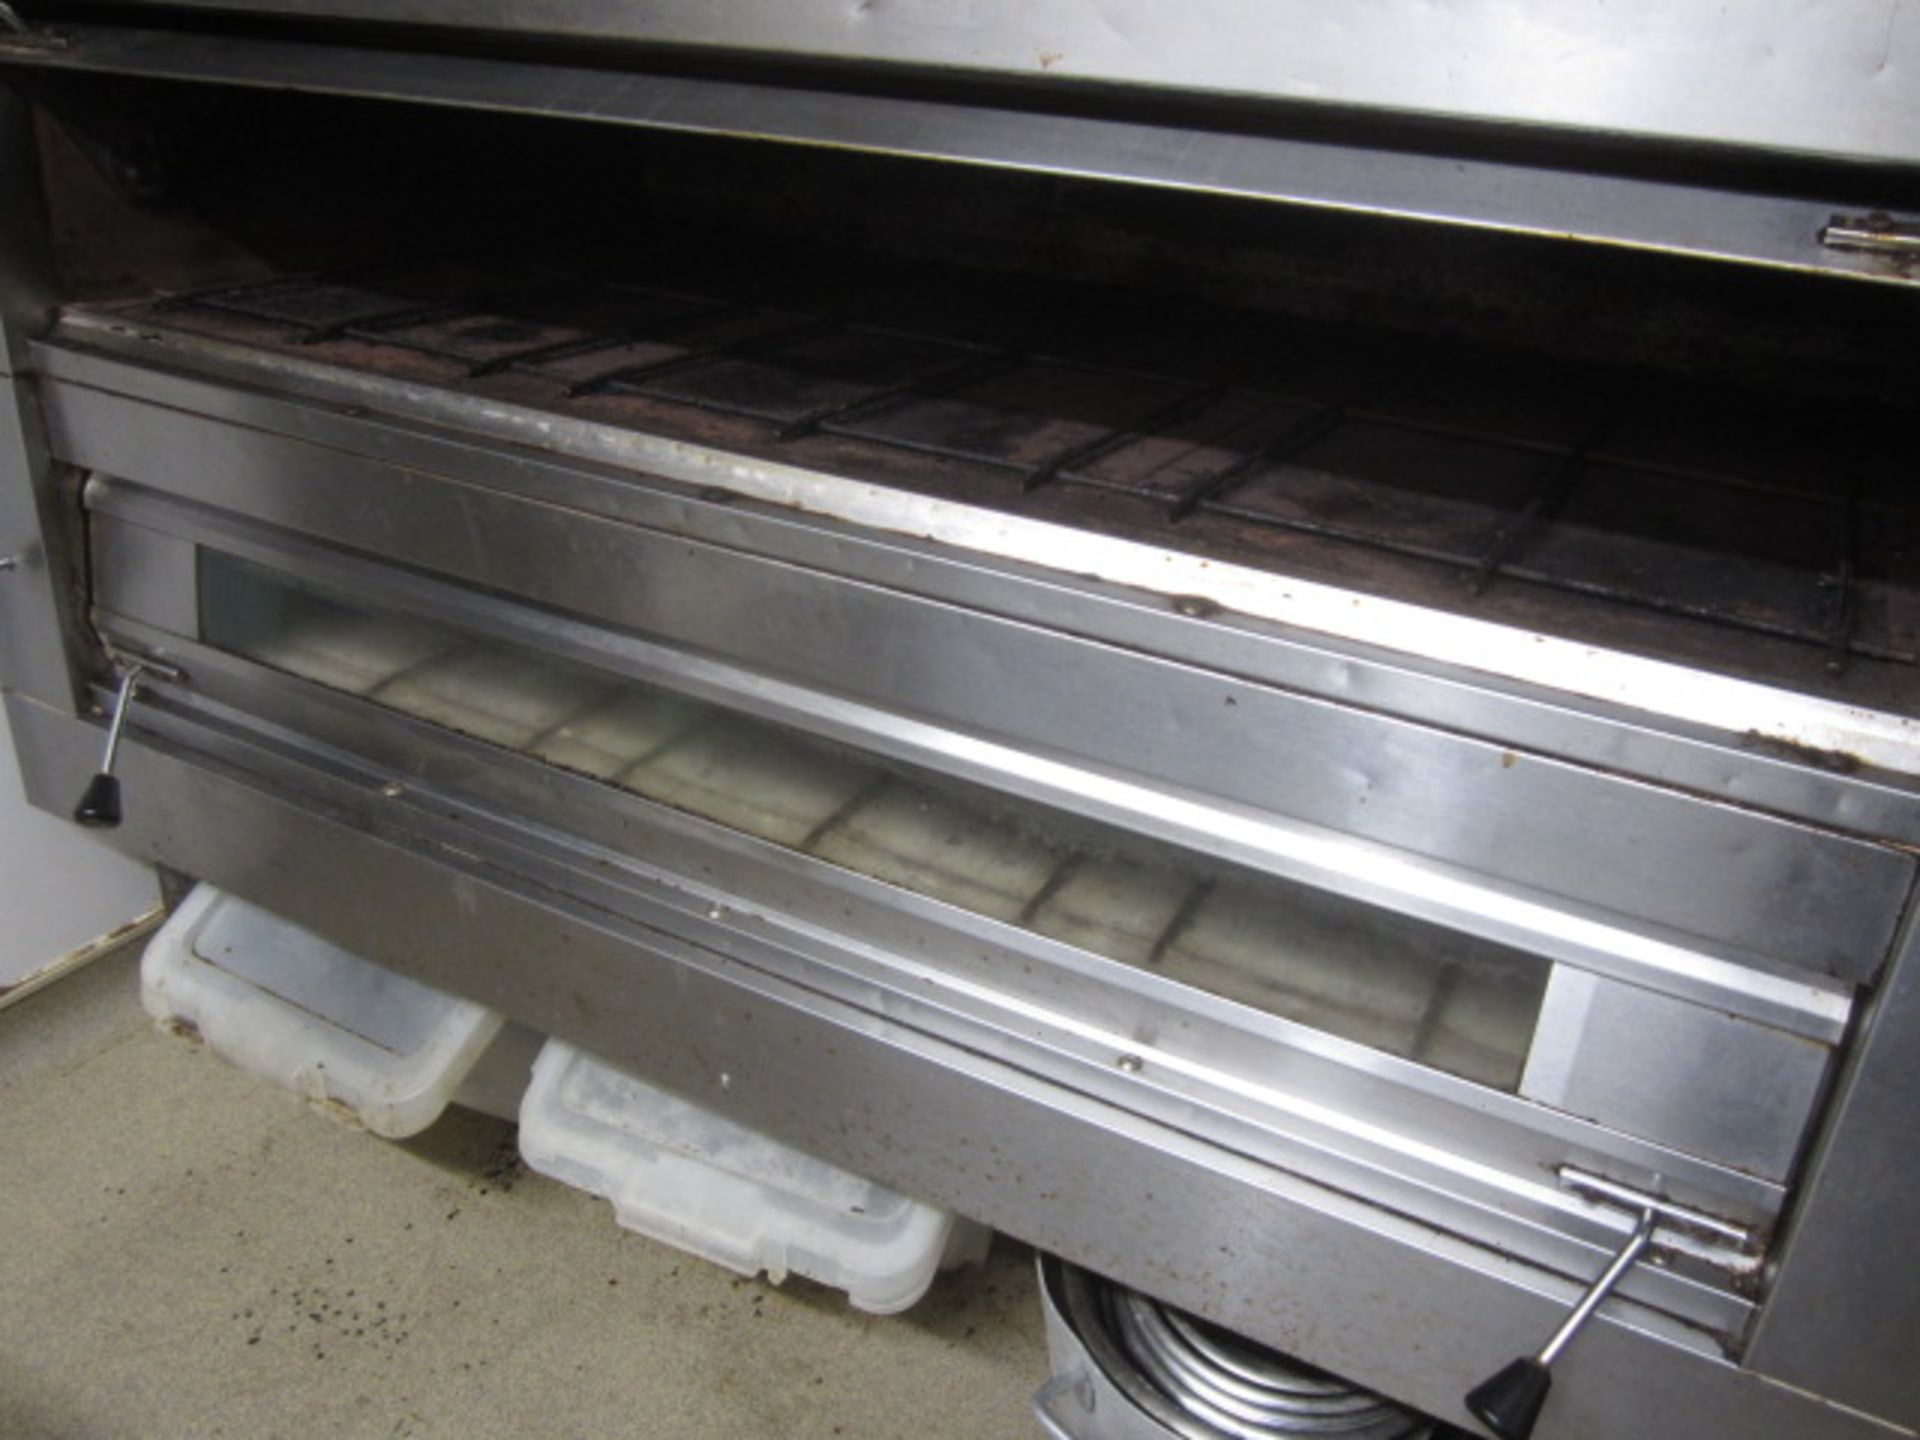 Dahlen stainless steel commercial 4 deck oven, 56" deck width, approx. overall size: 1950mm x 2010mm - Image 4 of 7